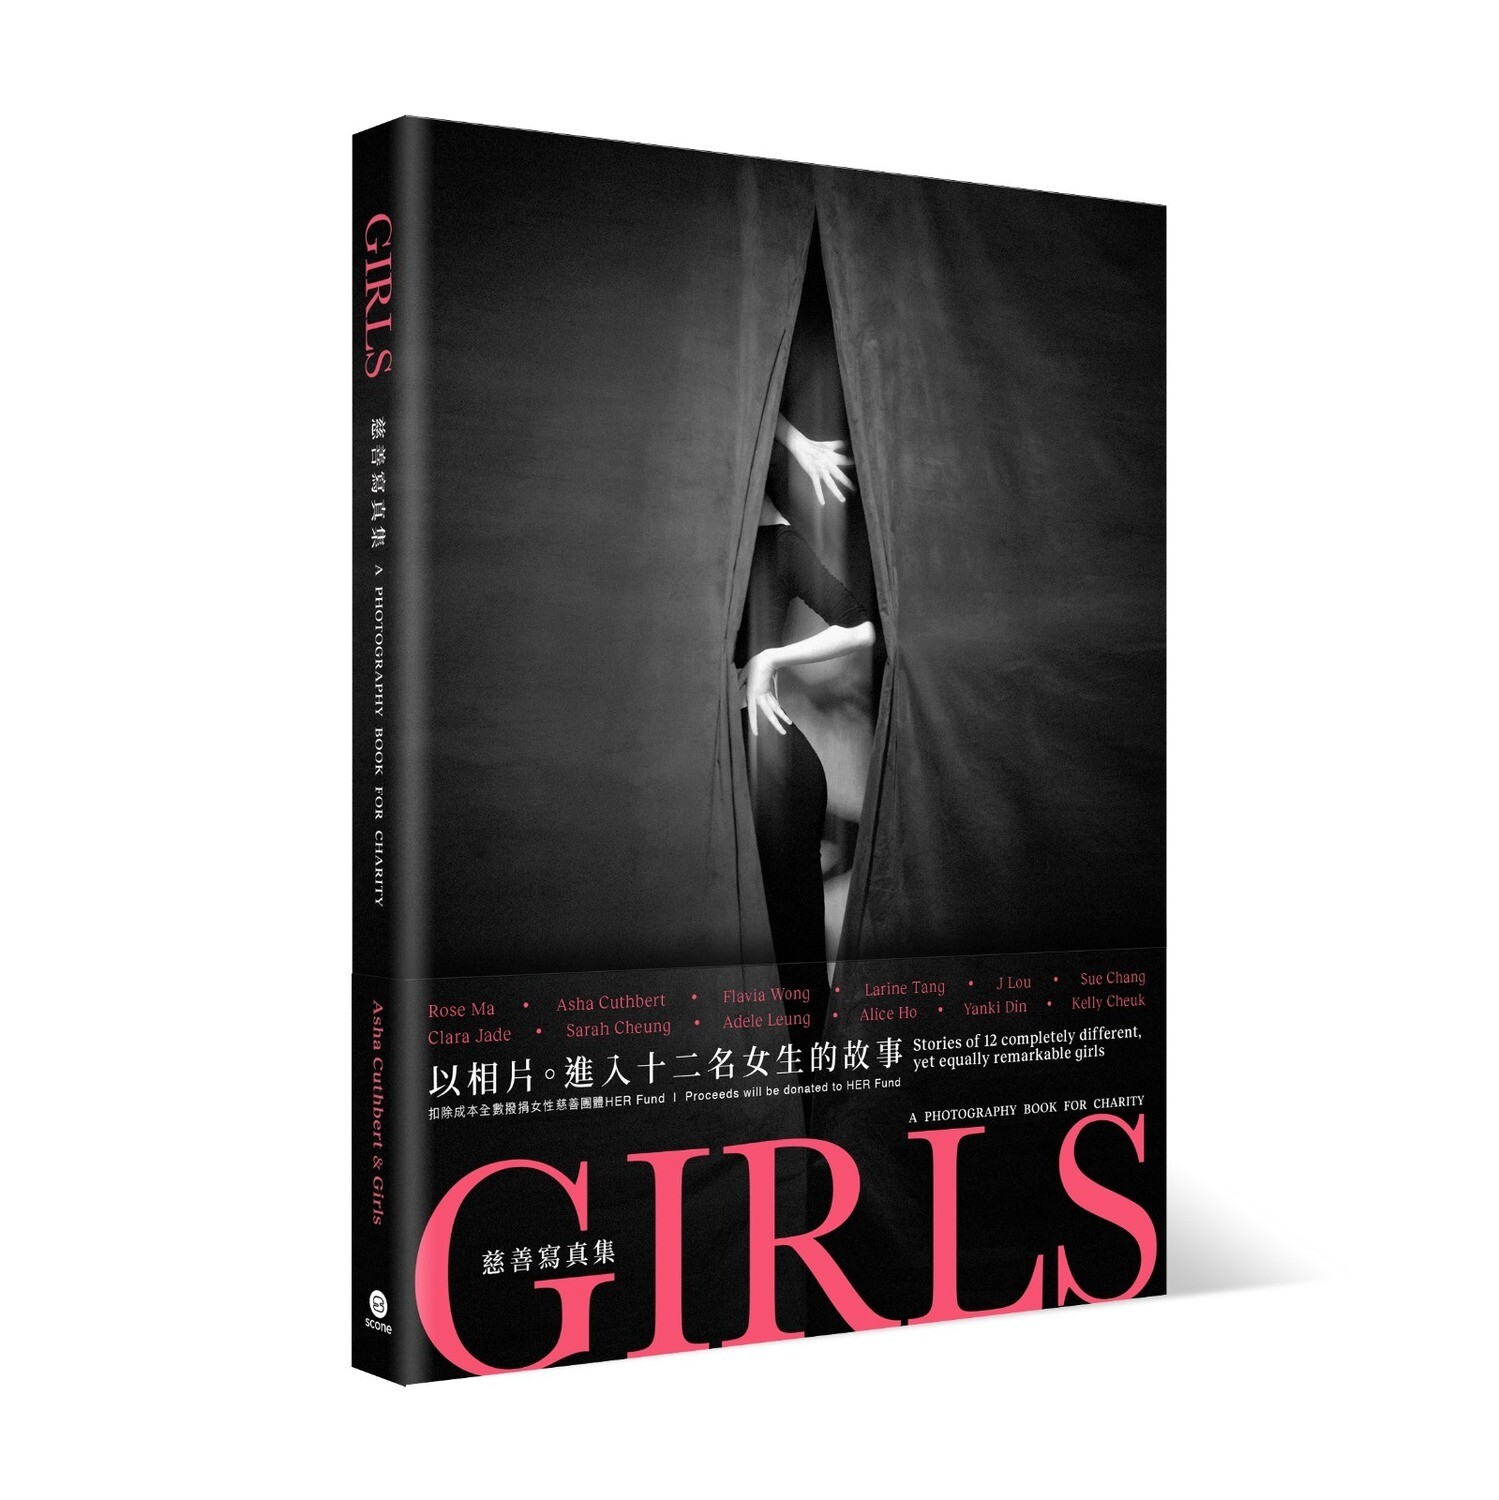 《GIRLS》慈善寫真集 
(不包運費) (已包含$10 Paypal 手續費)

Order for GIRLS 
（Shipping cost NOT included) ($10 Paypal charges is incl.）